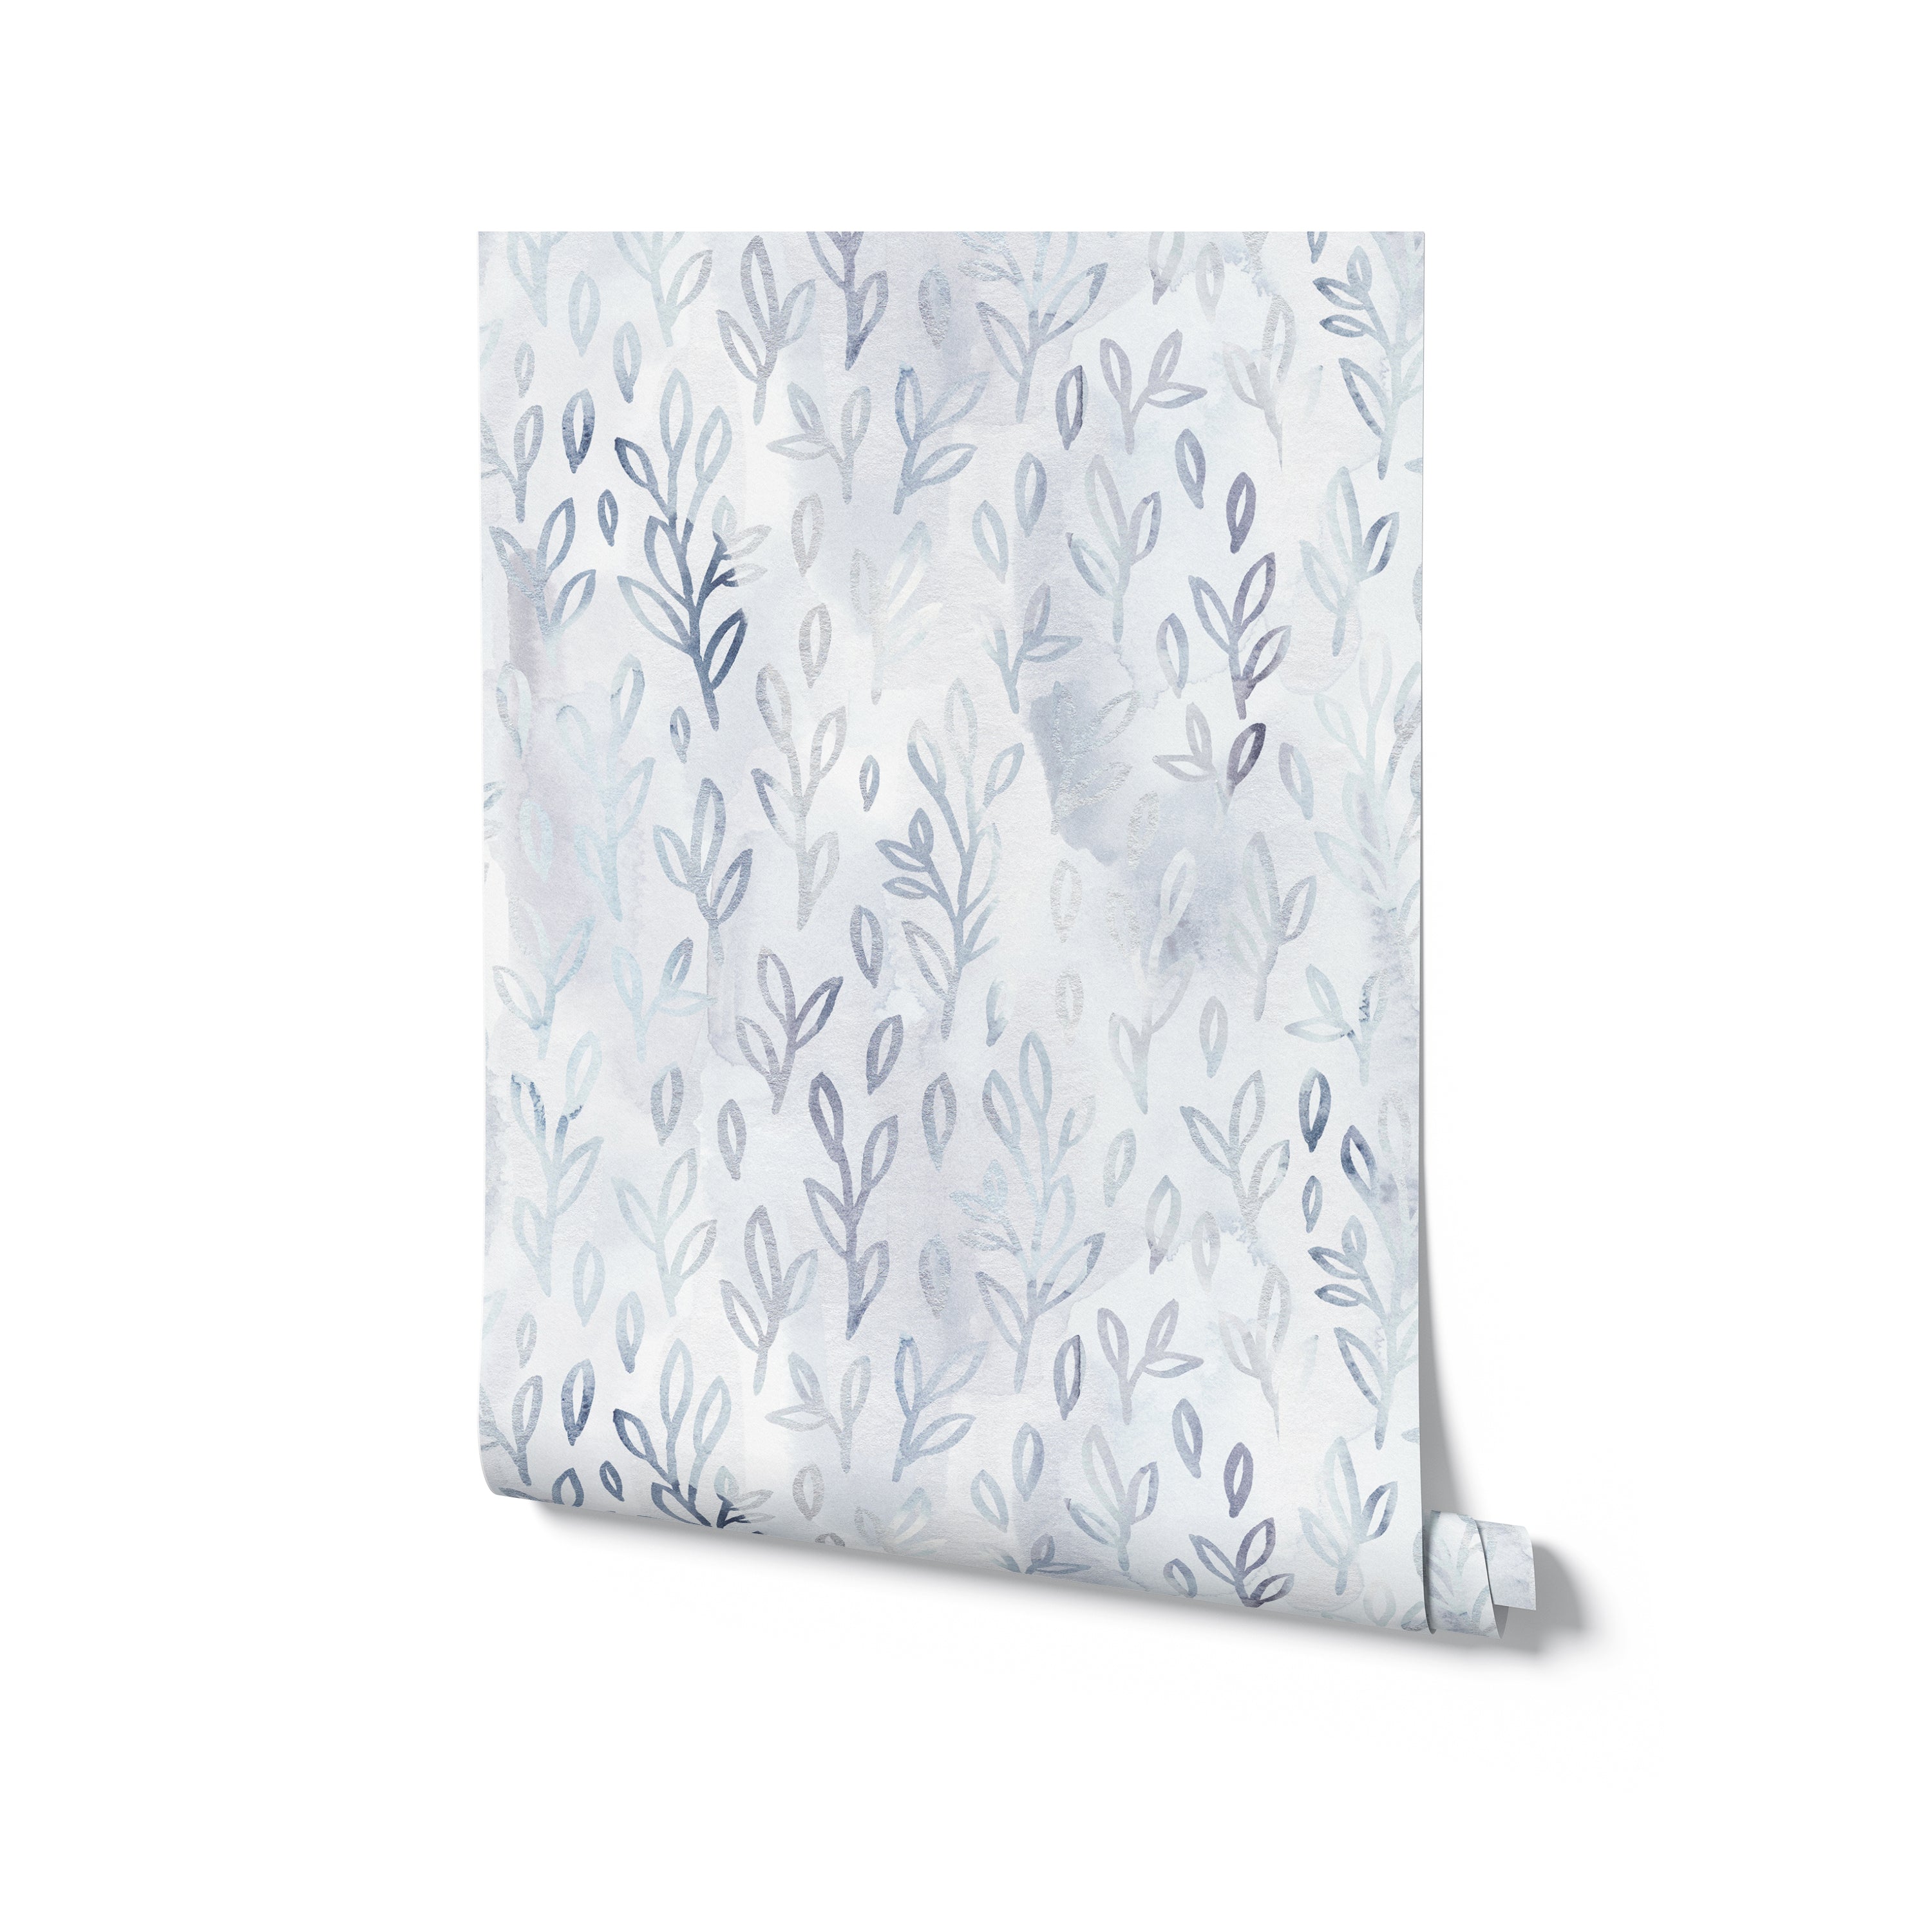 A roll of Floral Foil Wallpaper II displayed vertically. The wallpaper features an elegant pattern of light blue and grey leaves on a soft, textured background, ideal for creating a tranquil atmosphere in any room